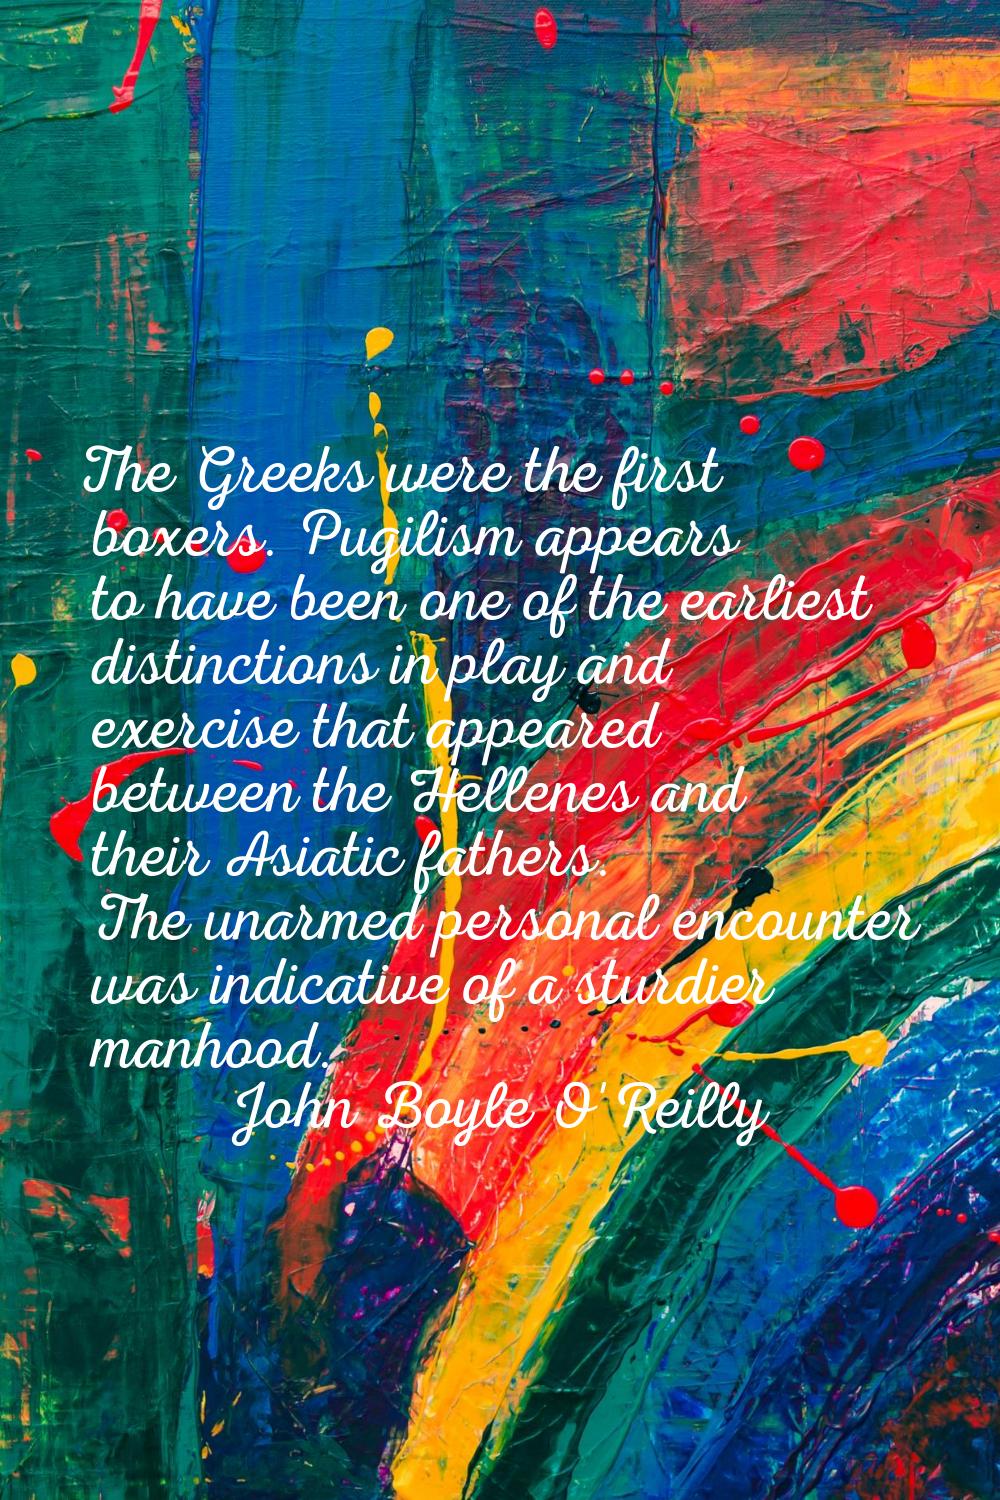 The Greeks were the first boxers. Pugilism appears to have been one of the earliest distinctions in